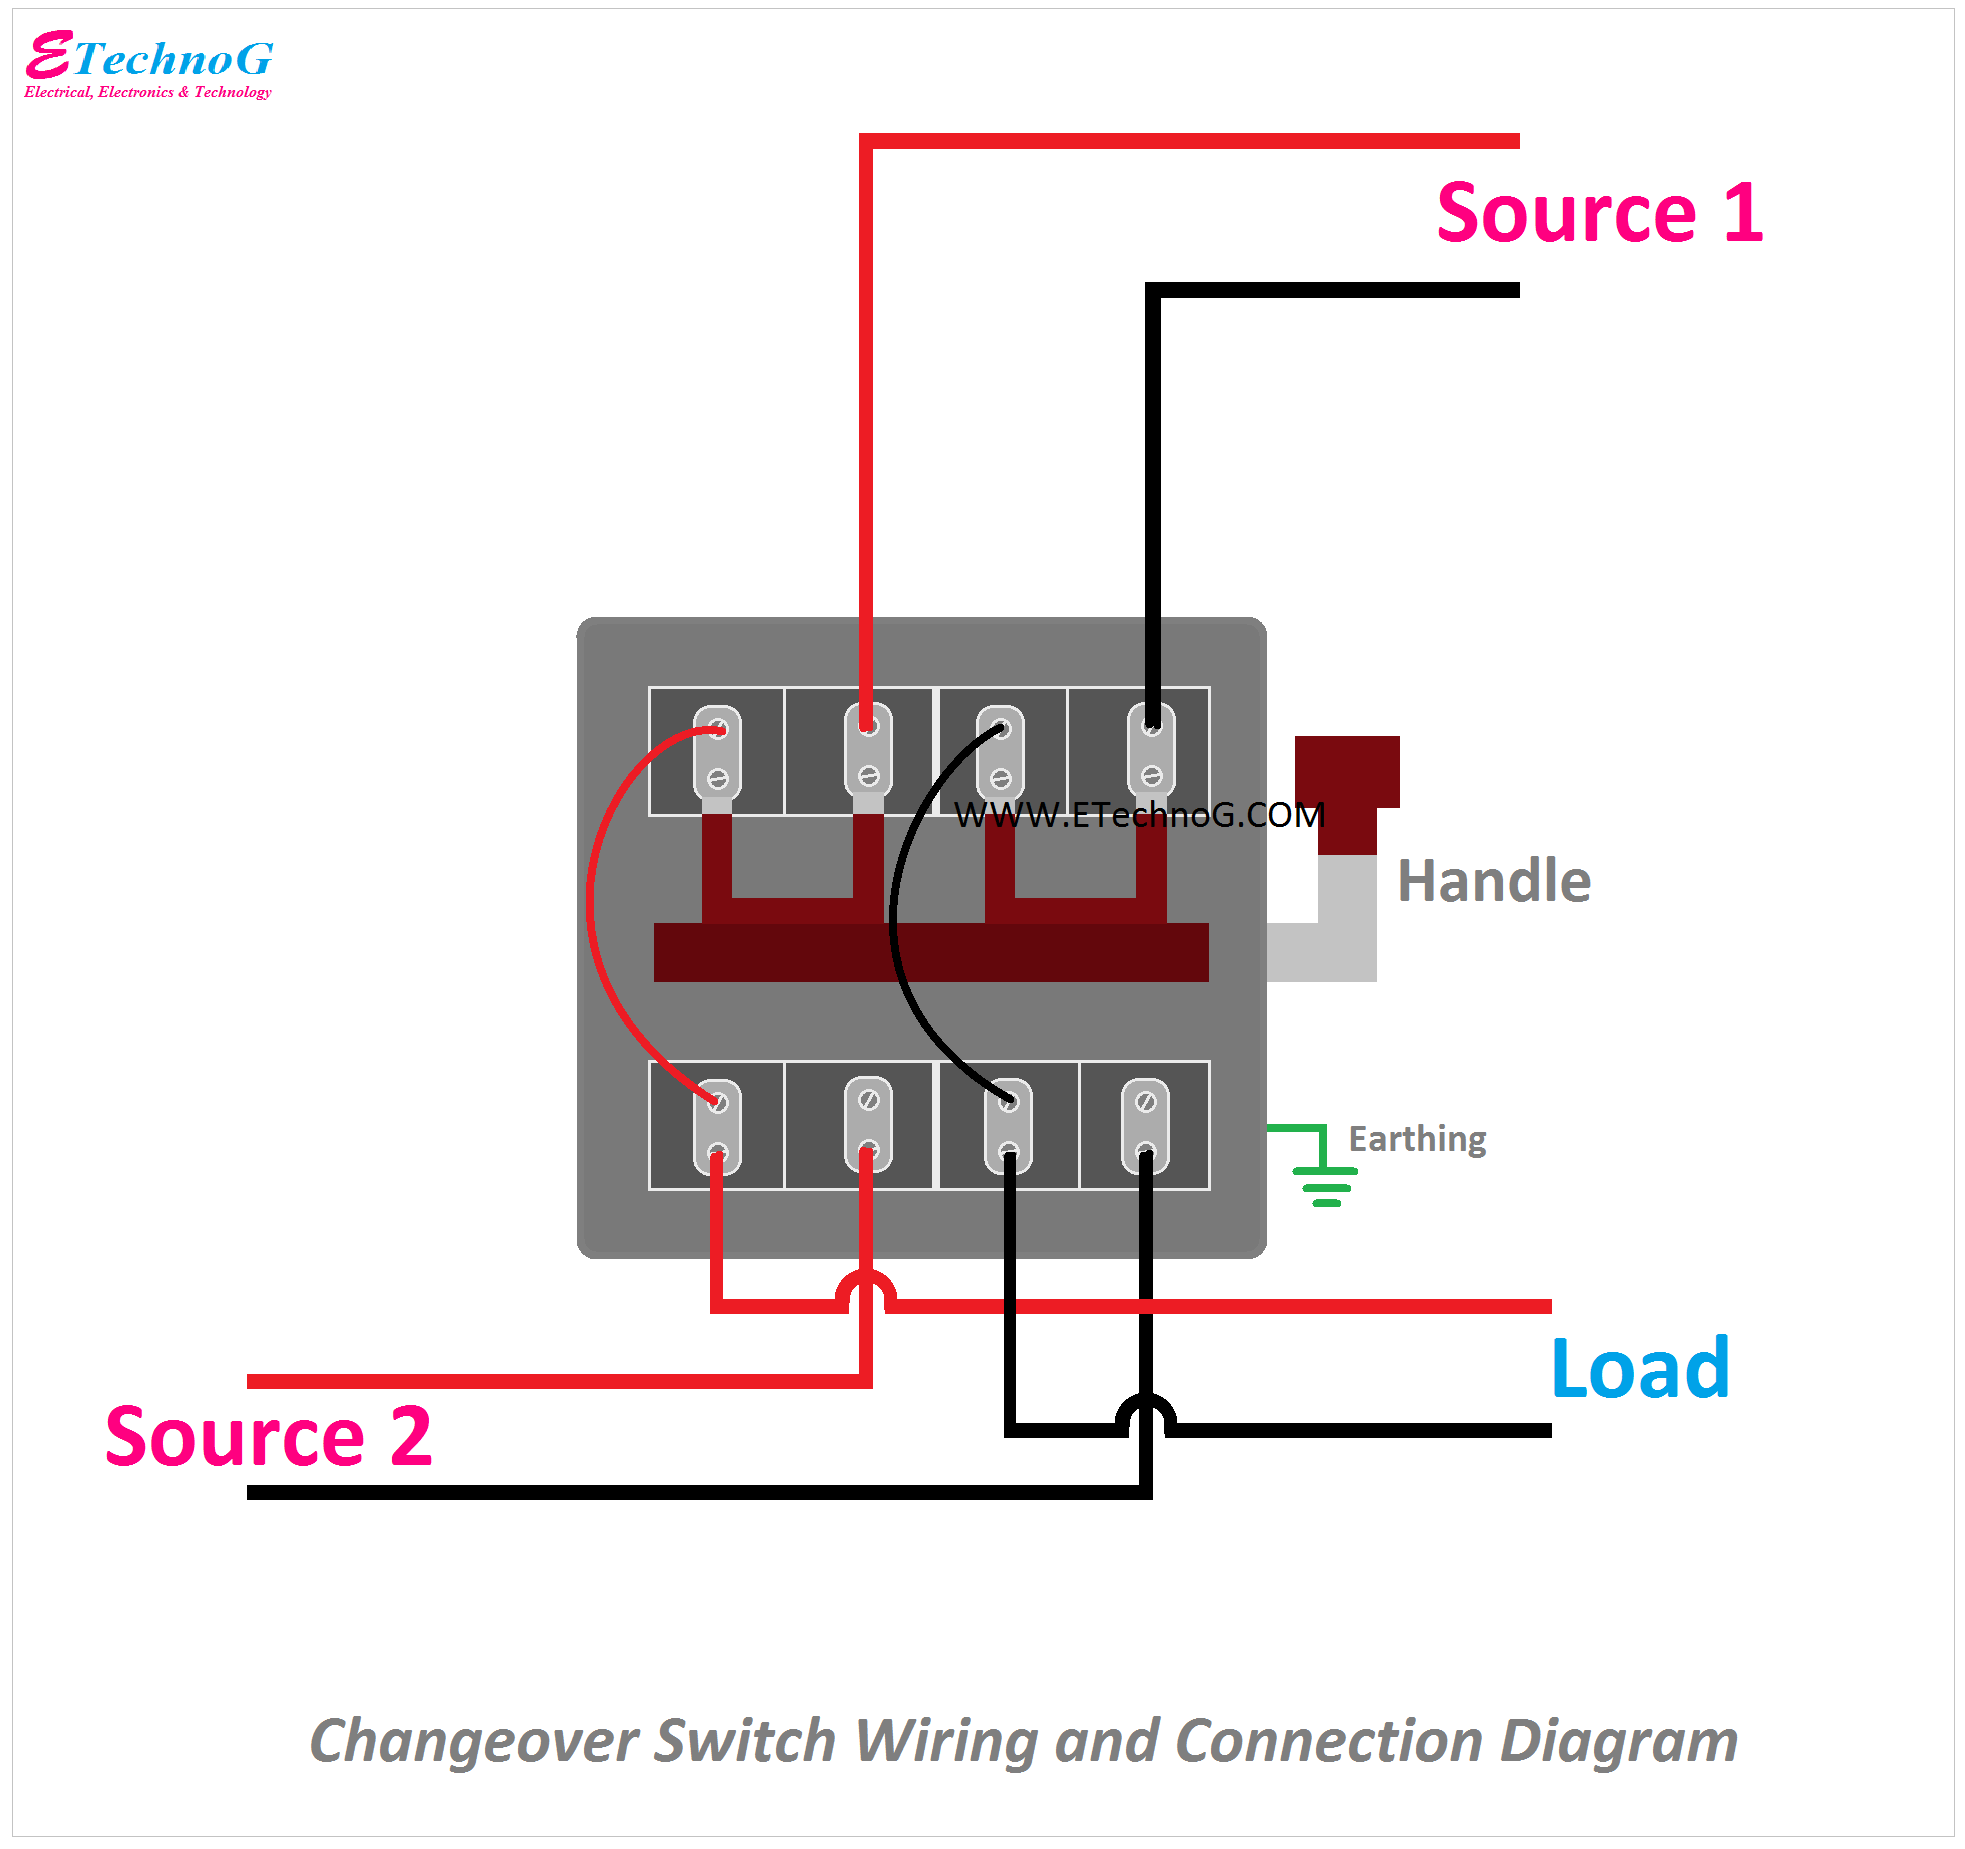 What Is Changeover Switch Wiring And Connection Diagram Etechnog